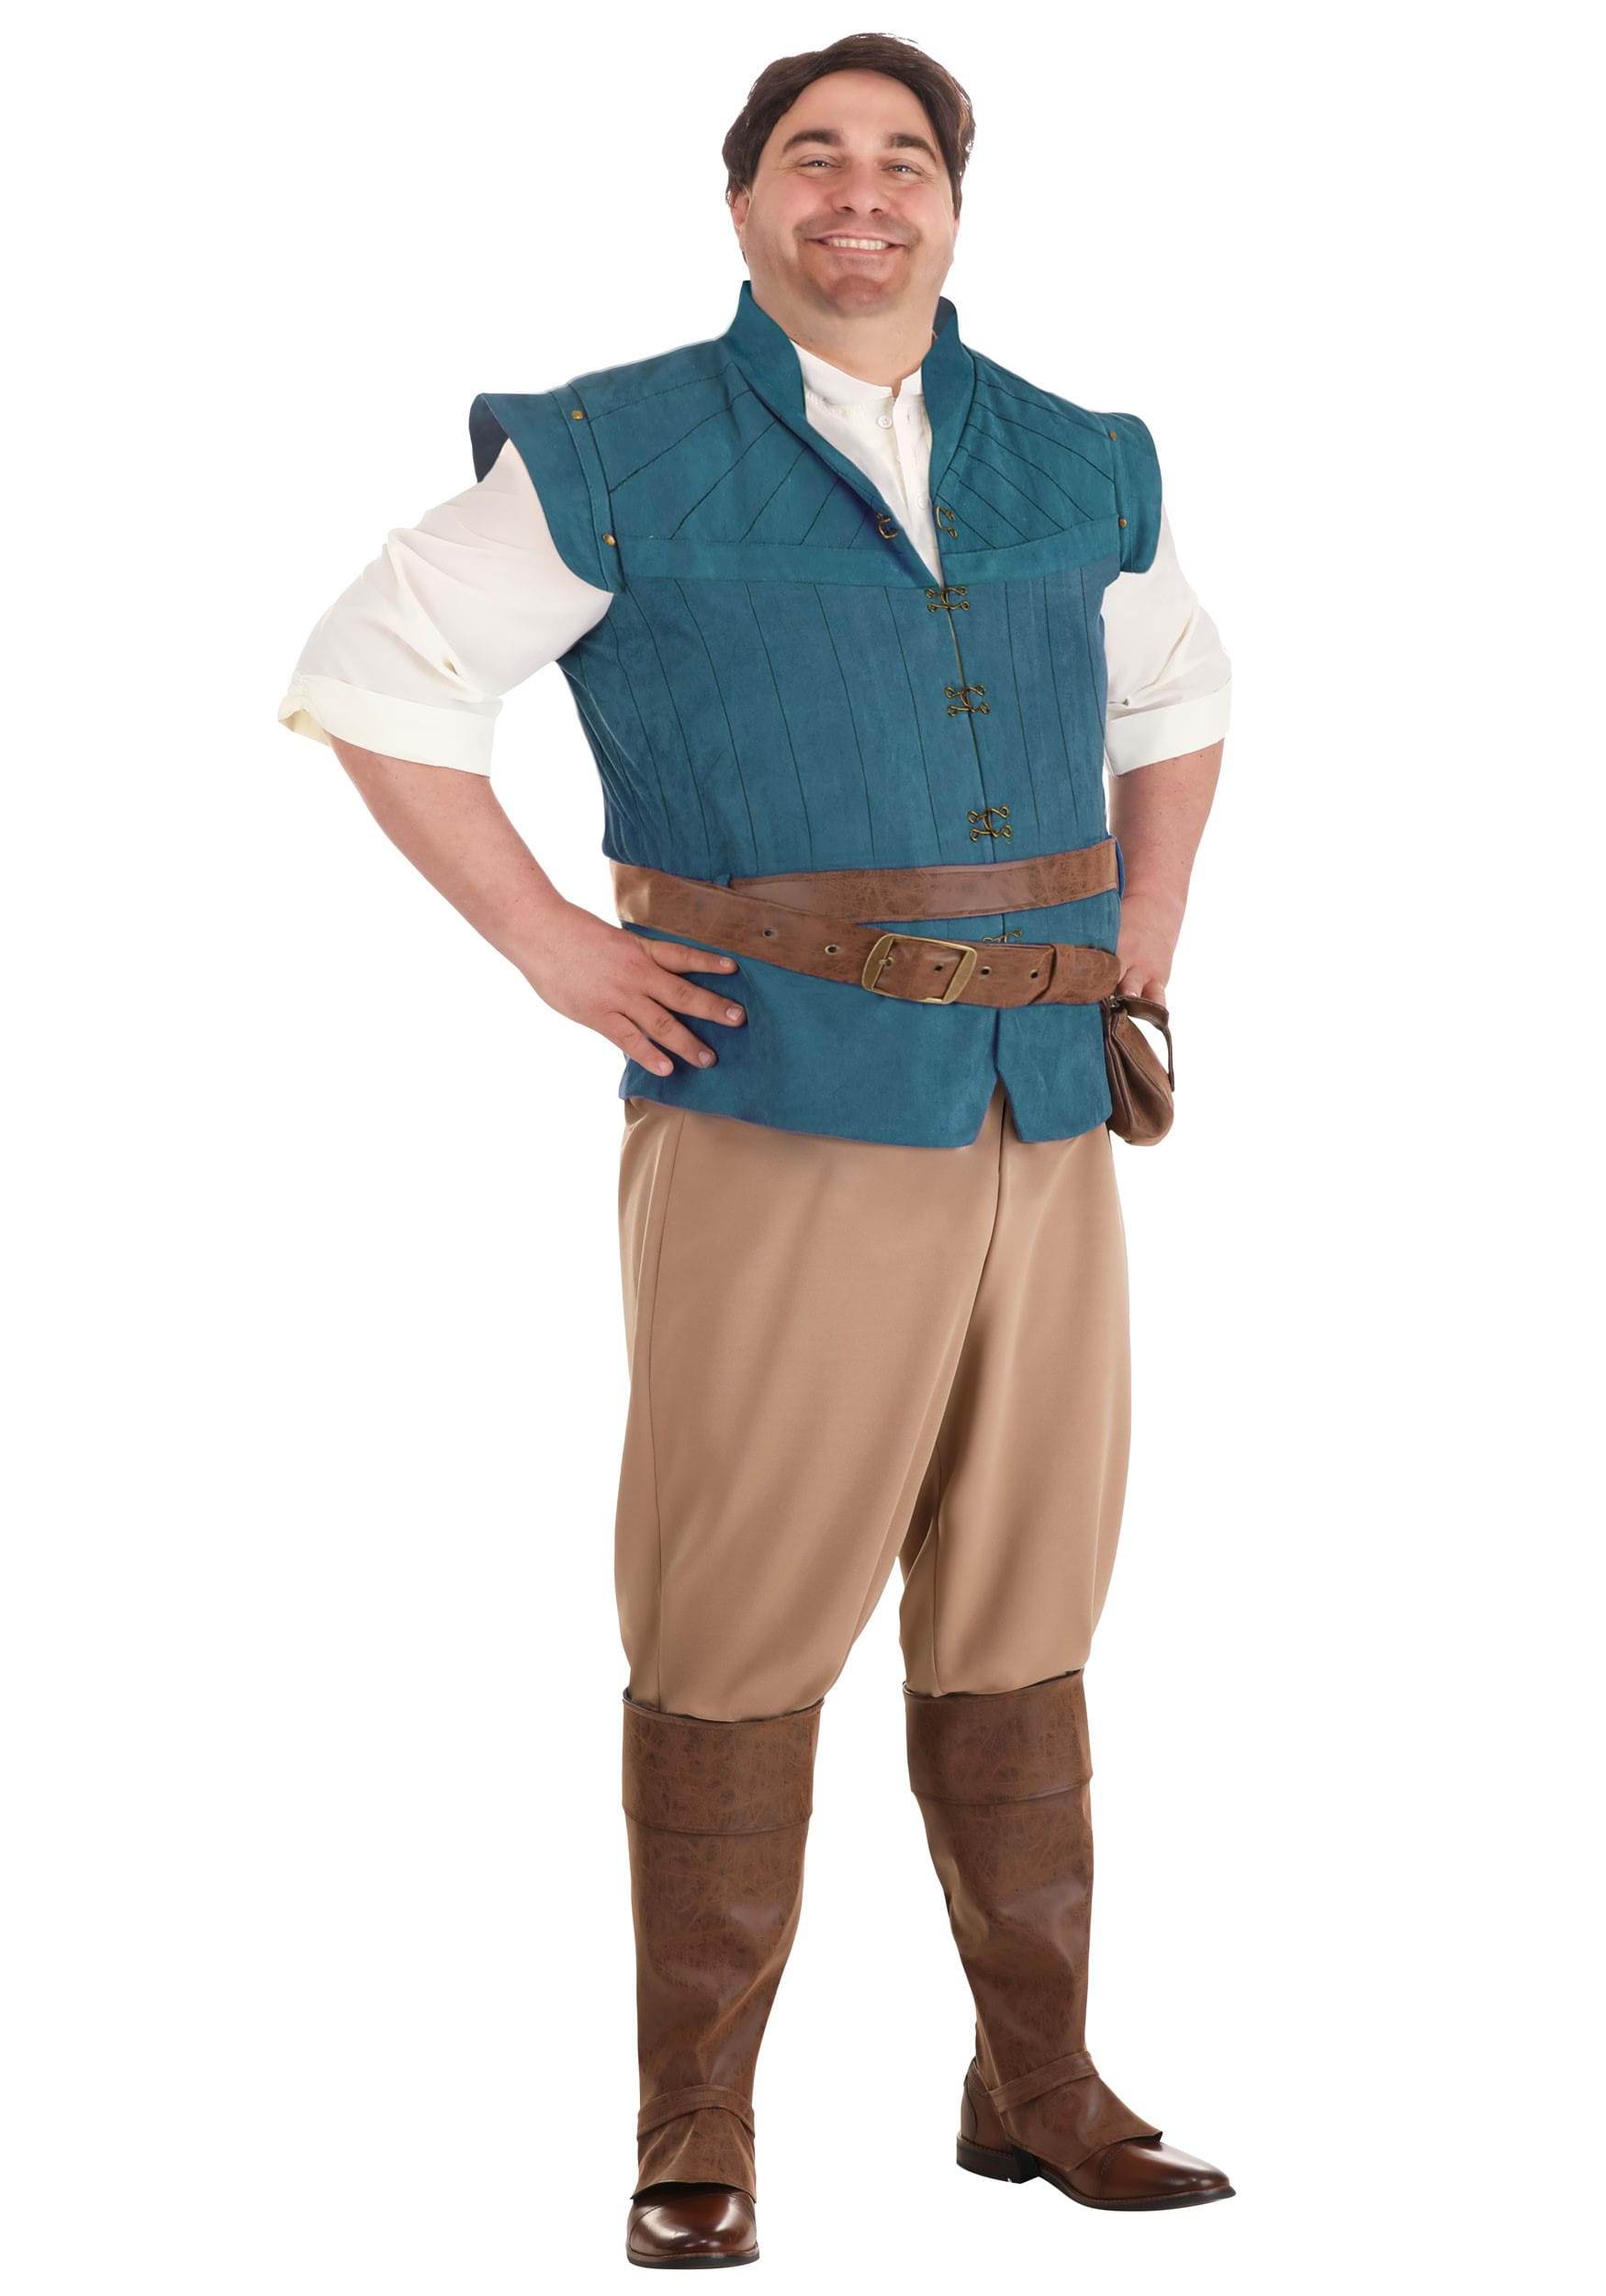 Photos - Fancy Dress Rider FUN Costumes Plus Size Tangled Flynn  Costume for Men Brown/Green 